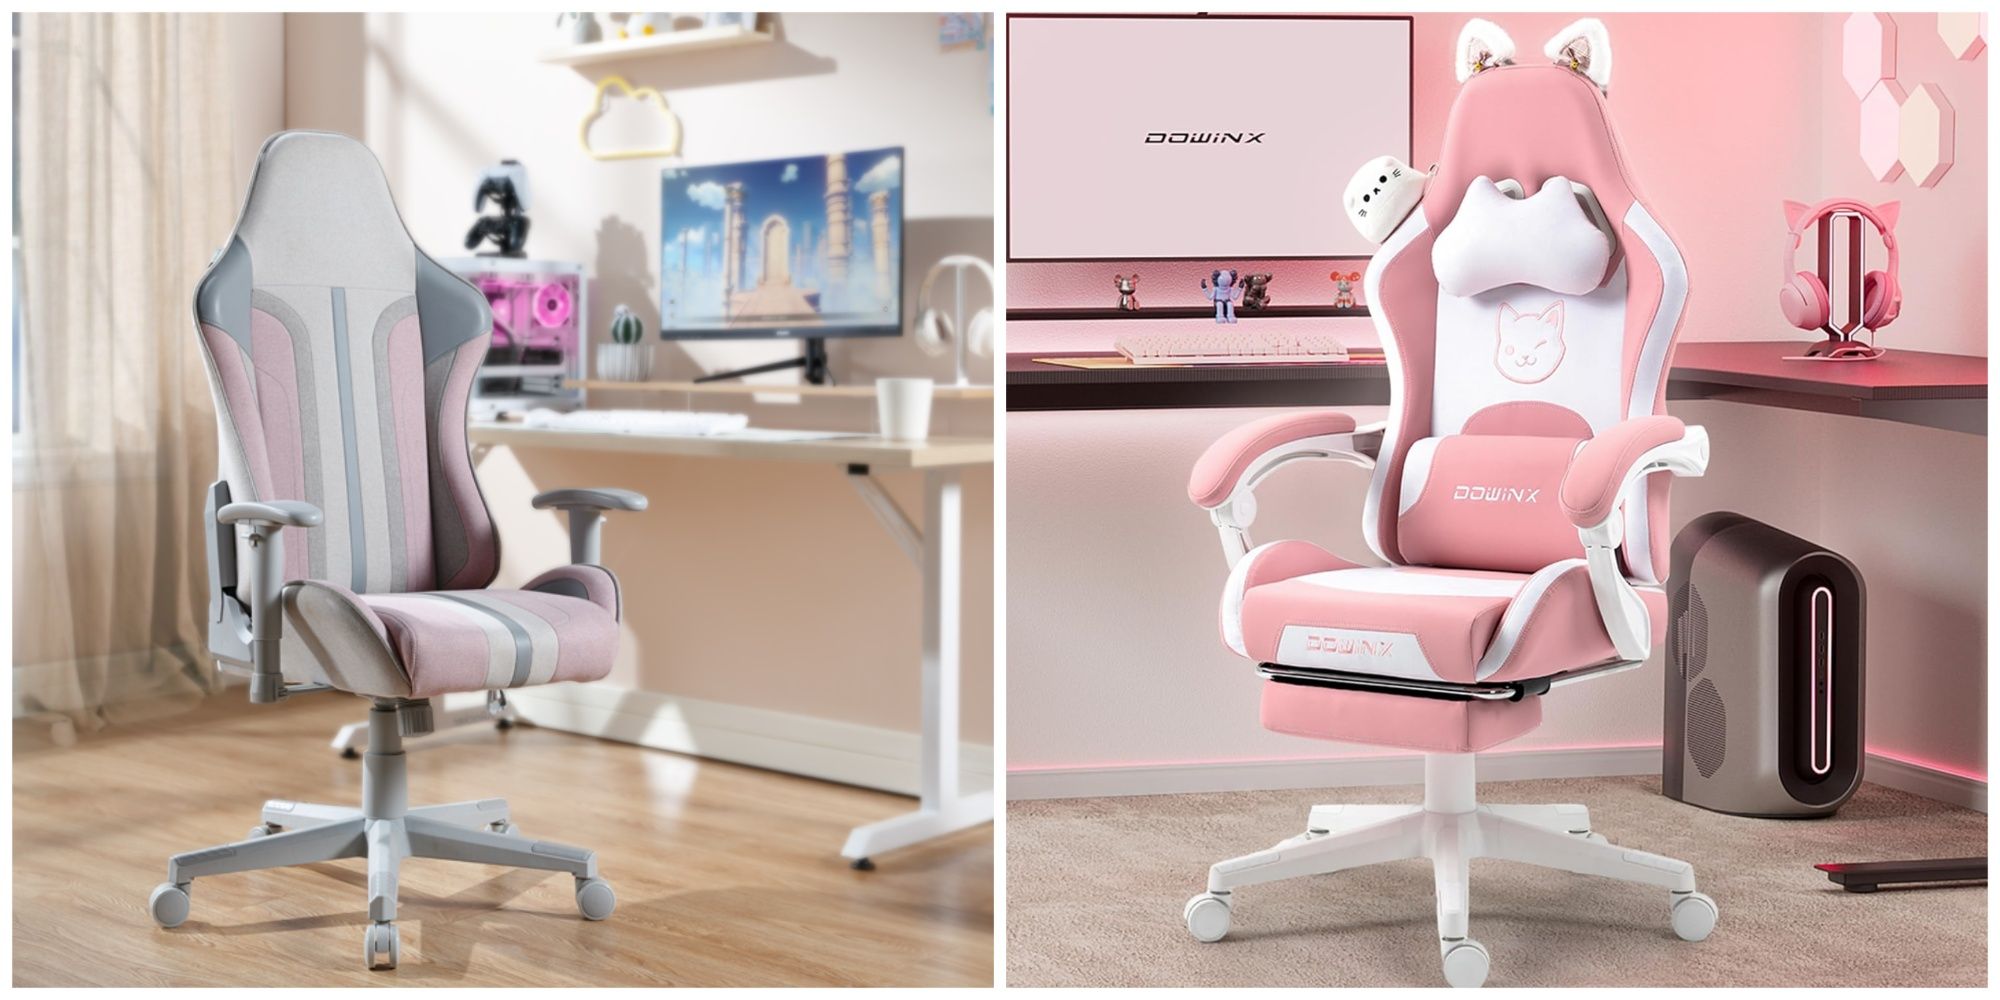 Two petite gaming chairs with a pink theme, an X Rocker on the left and a Dowinx Cat Ears chair on the right.